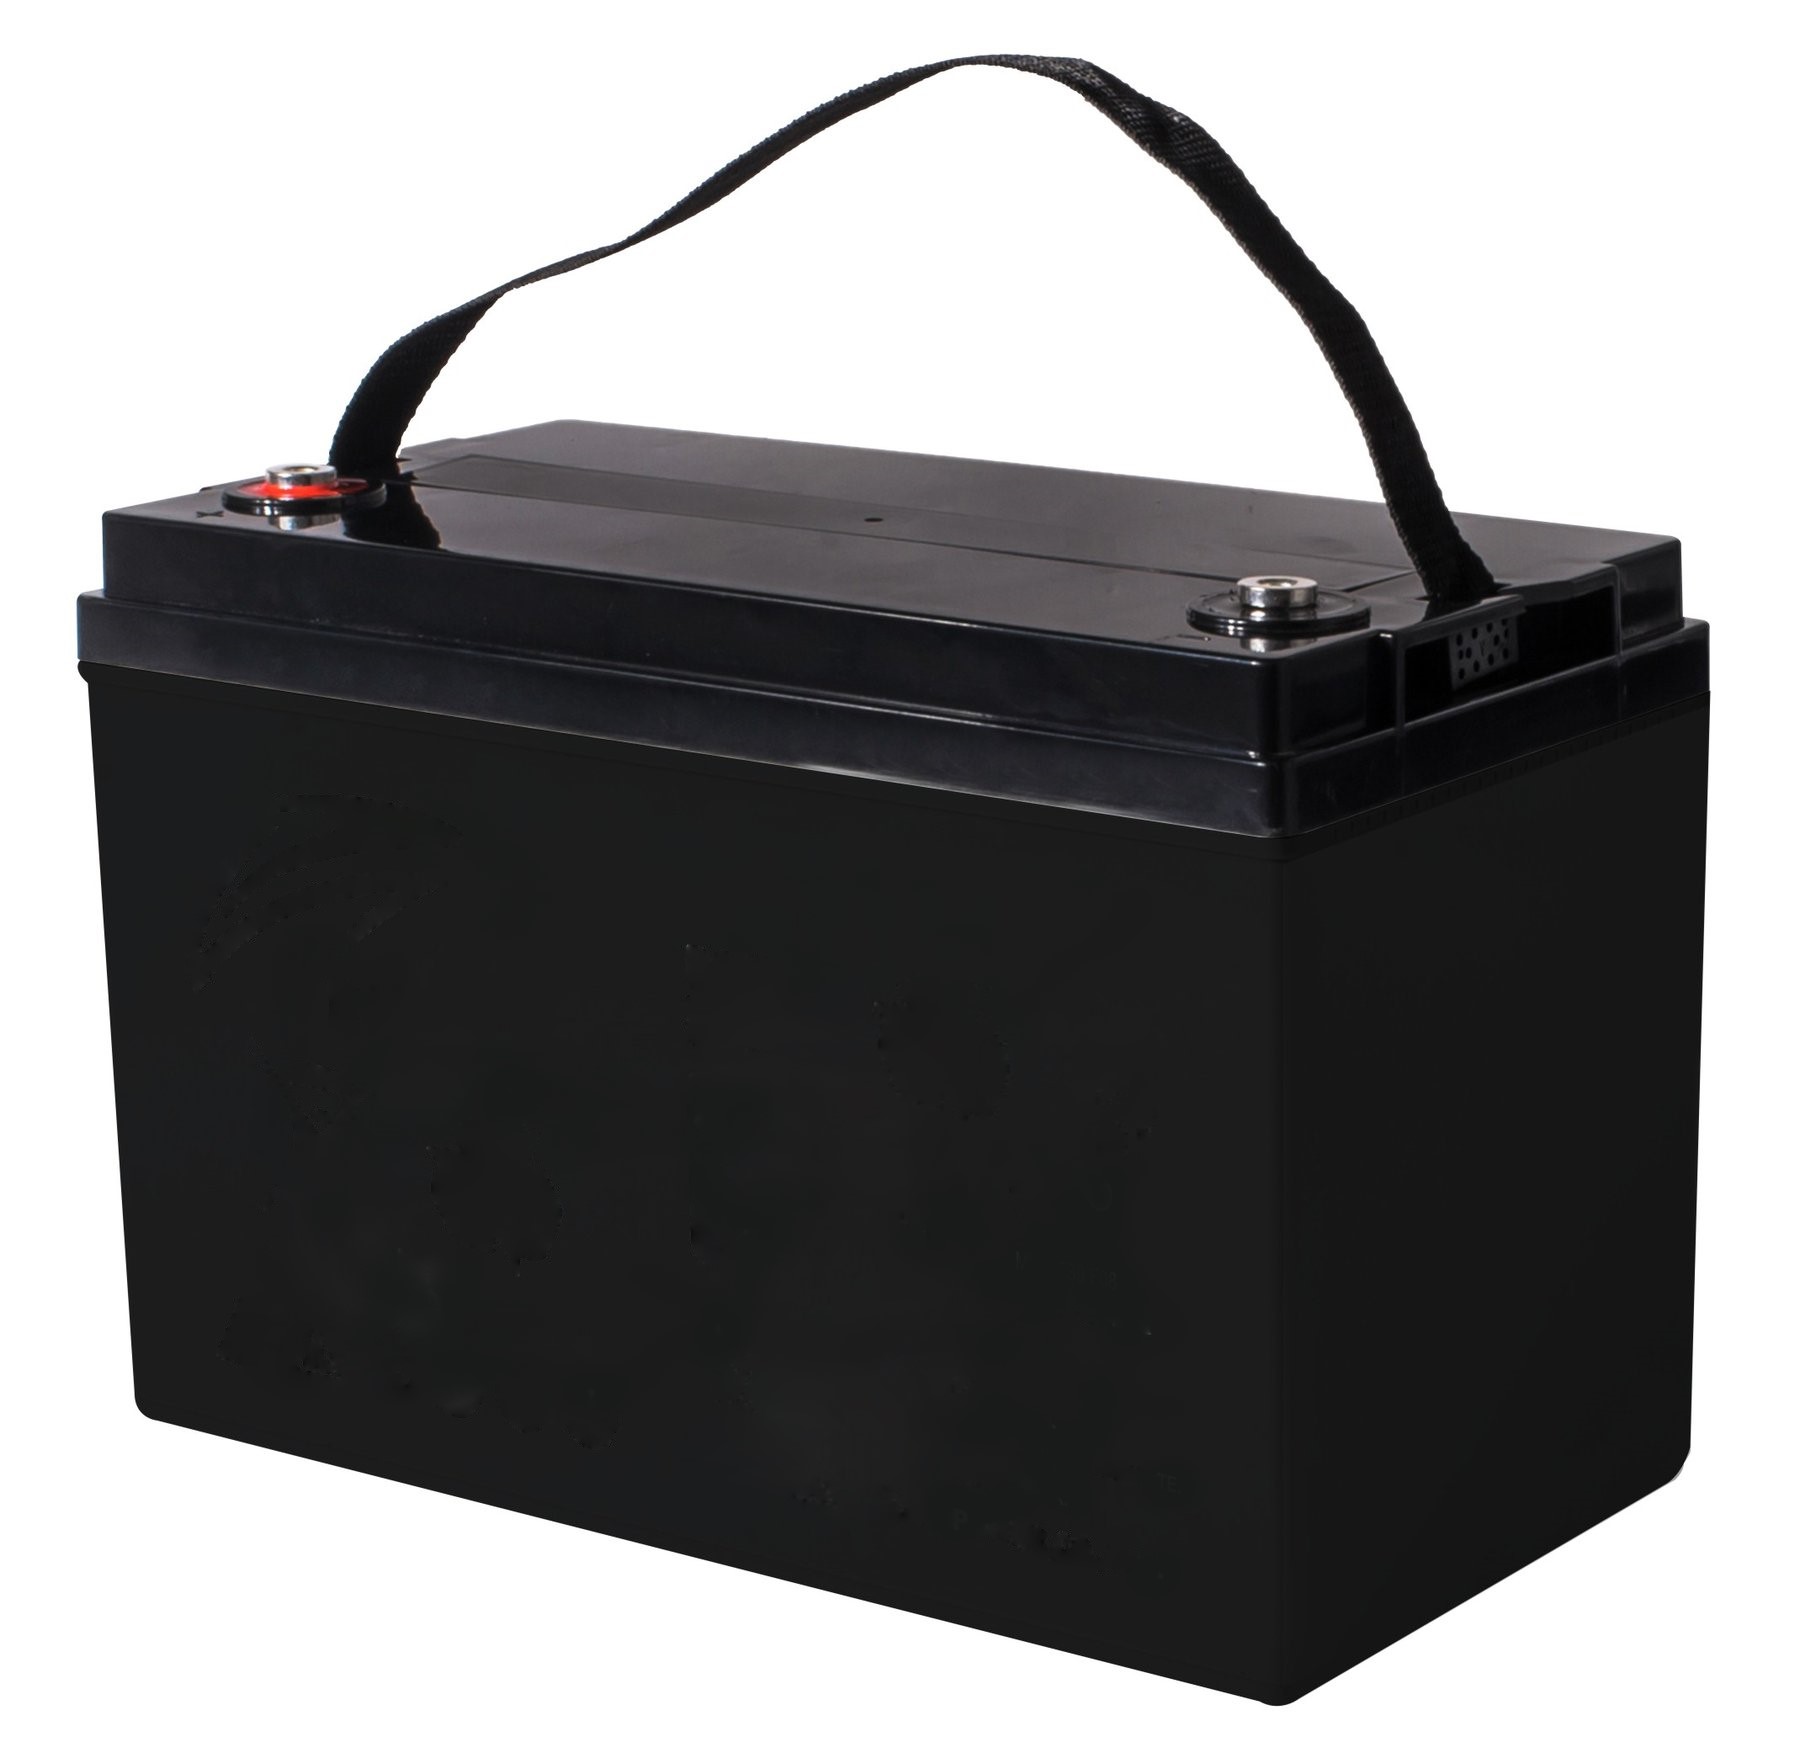 DC12-100 12VDC /100 Ah DEEP CYCLE GEL-CELL BATTERY 1000A (5 Sec) DISCHARGE OPERATE TEMP -20° ~ +60° 30A CHARGE CURRENT F5( M8) & F12( M8) BLACK 29KG